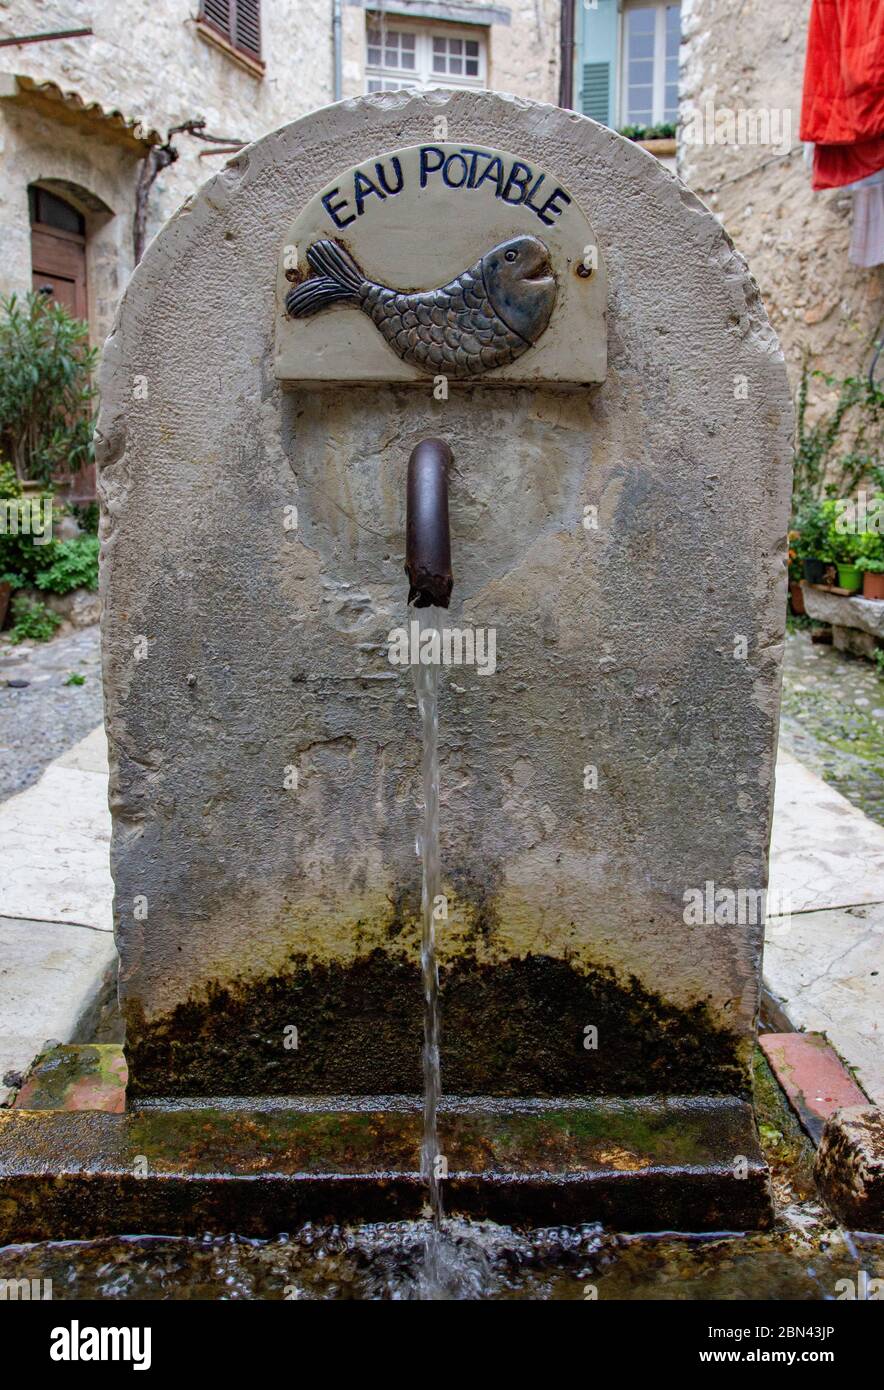 An old fountain, labeled 'EAU POTABLE' (potable water), with an image of a fish, distributes water in the town of Saint-Paul-de-Vence, France Stock Photo